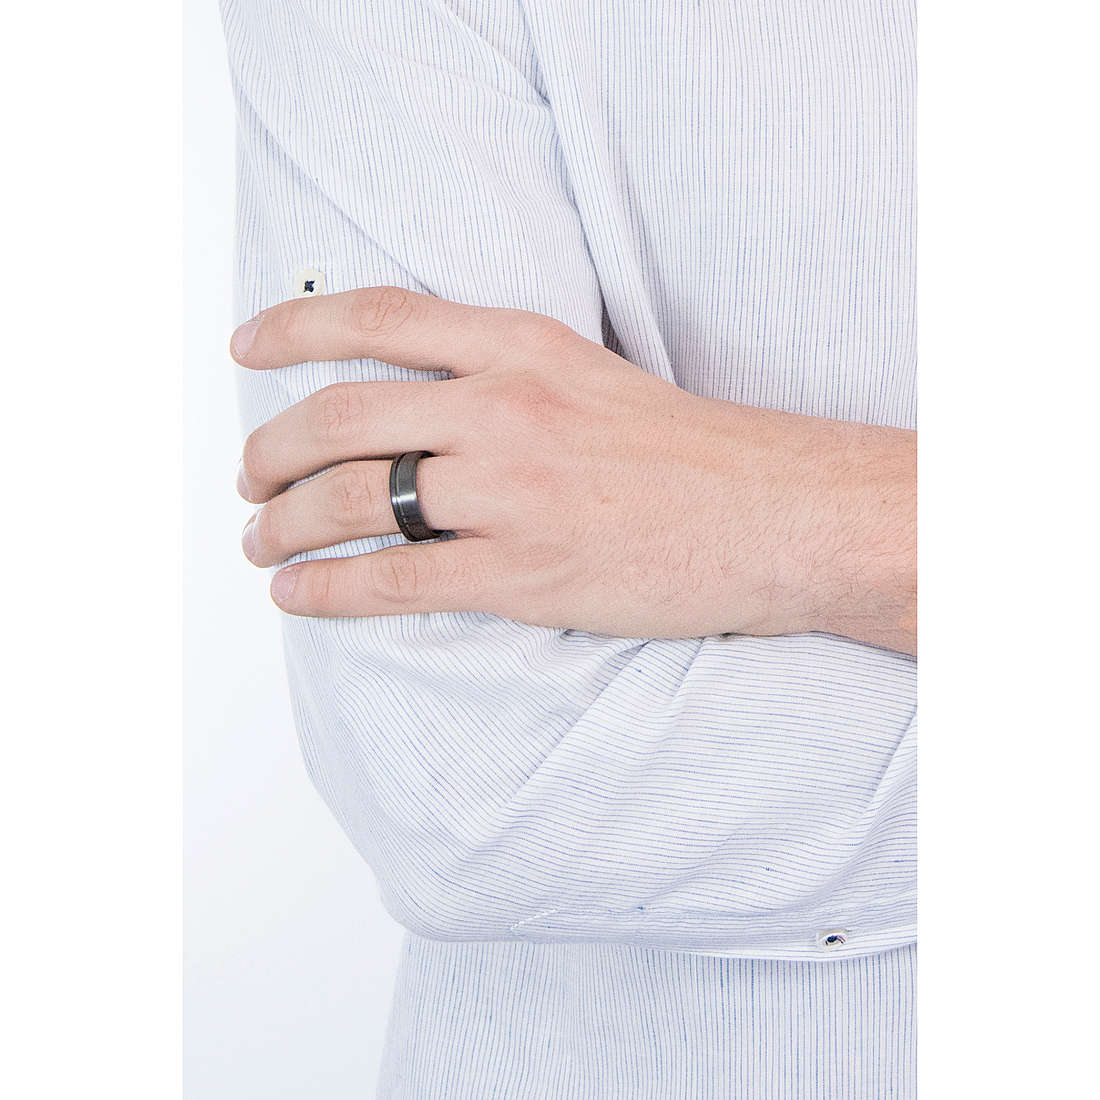 Sector rings Row man SACX09025 wearing